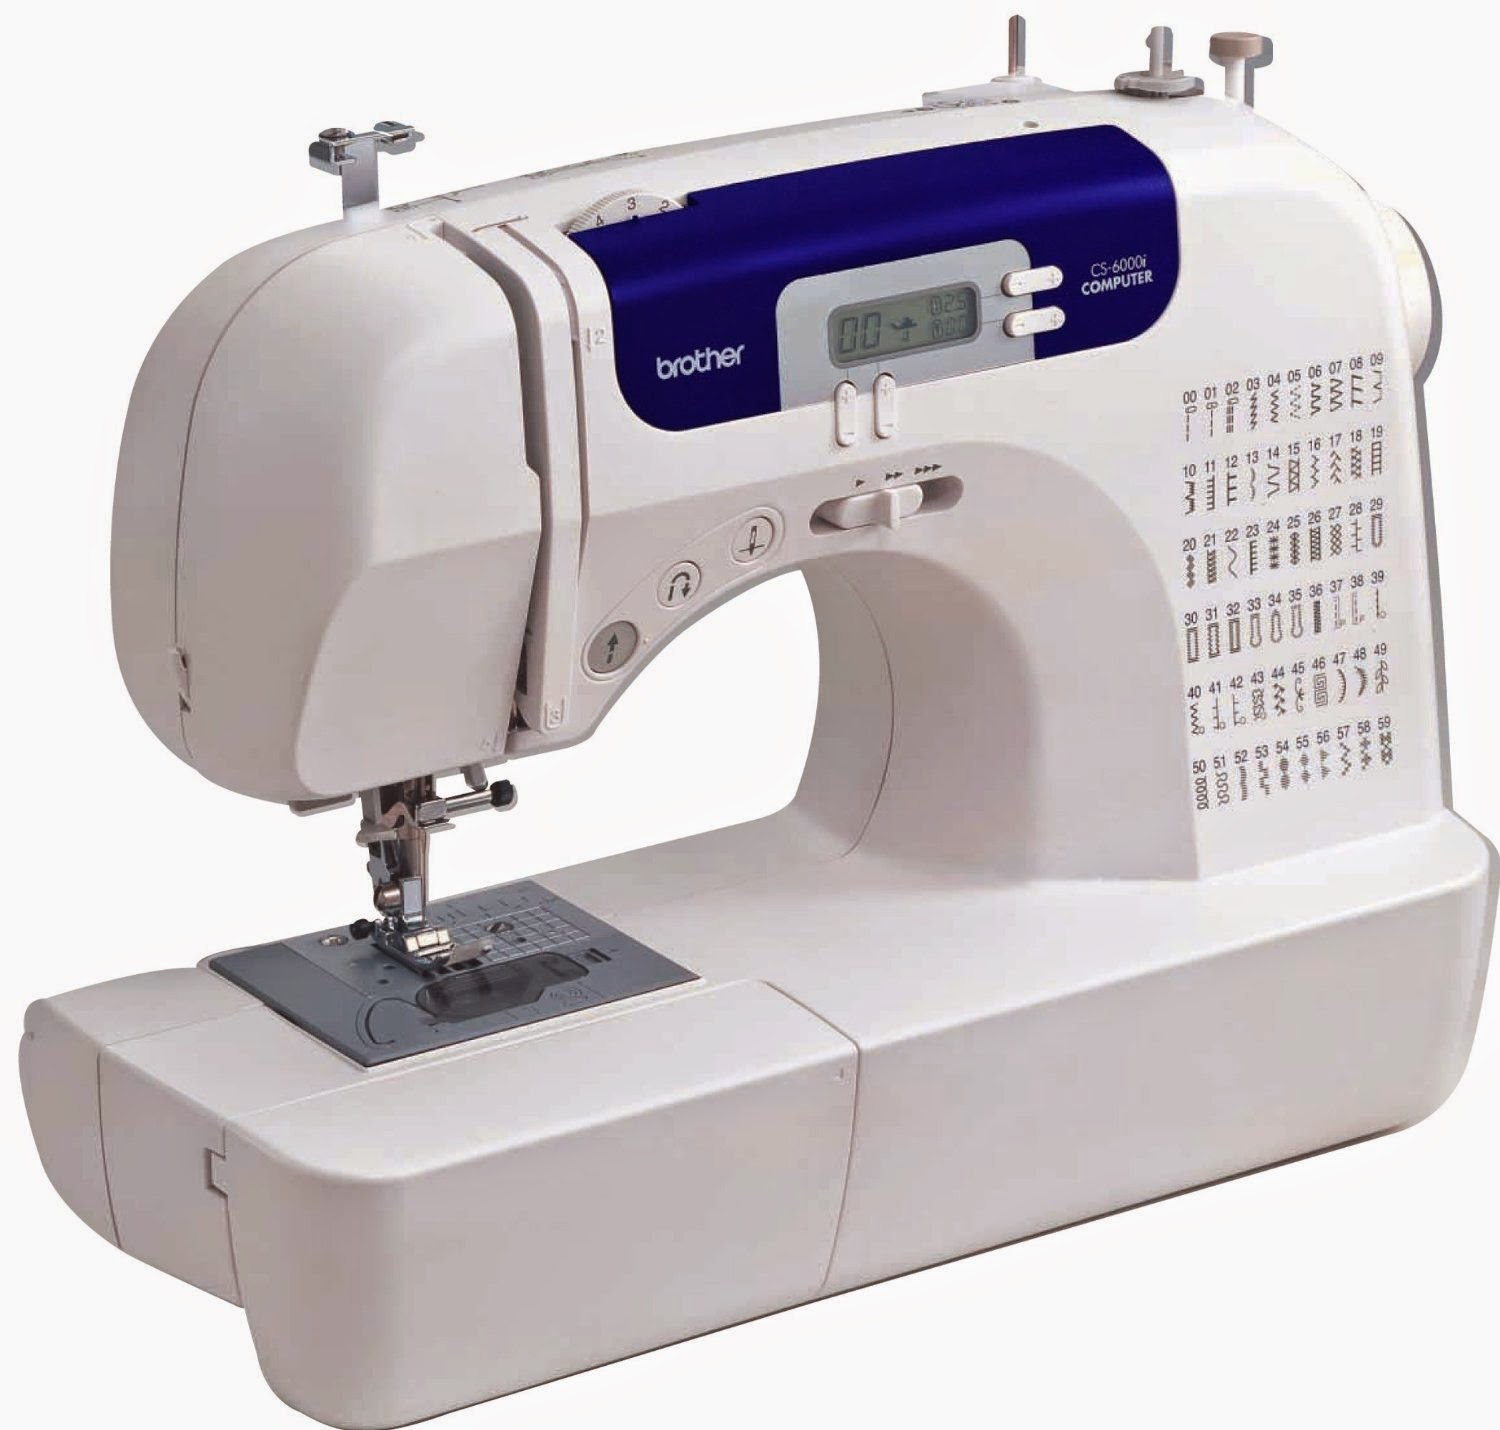 Brother CS6000i 60-stitch Computerized Sewing Machine, review, lightweight & portable, utility  stitches, quilting stitches, heirloom stitches, decorative stitches, auto-size buttonholes, drop-in bobbin, auto needle threader